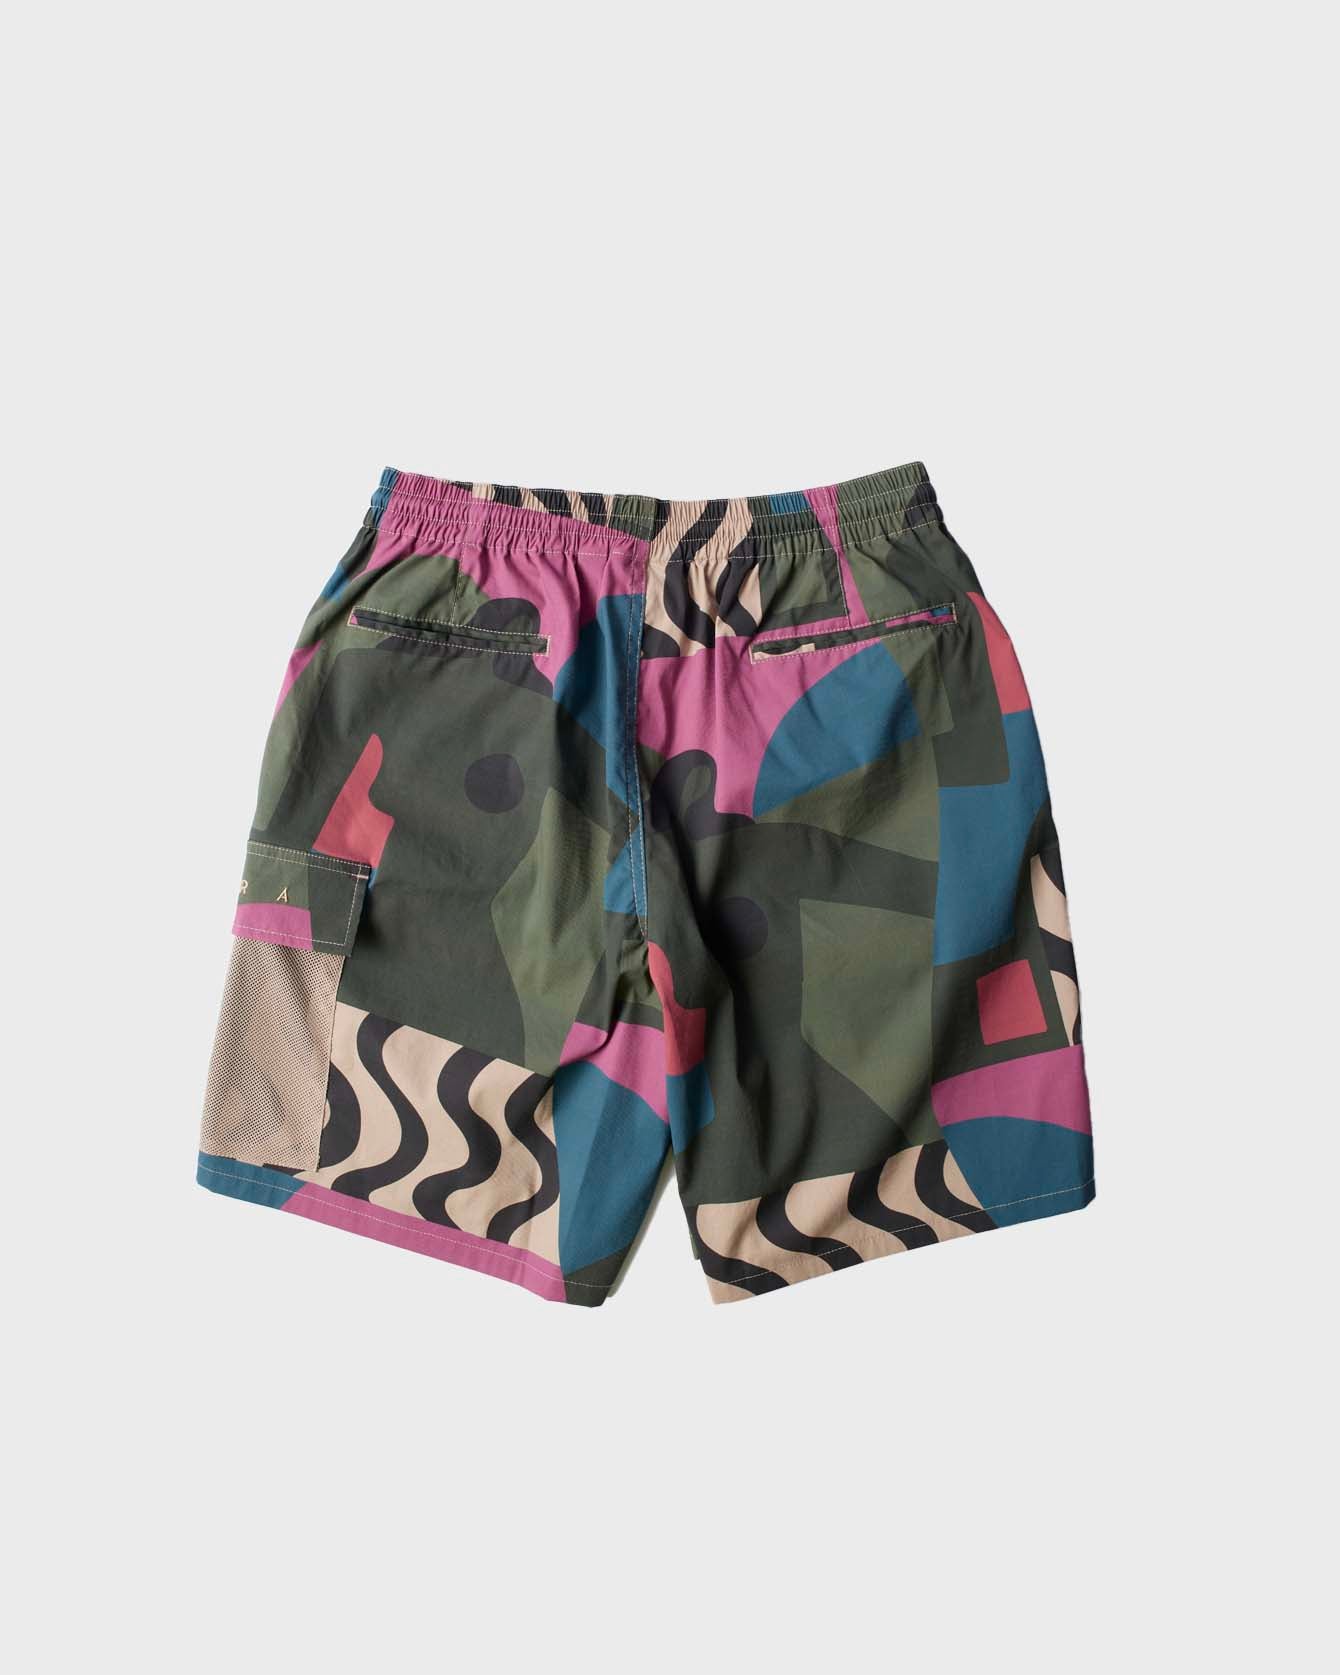 Distorted camo shorts pink